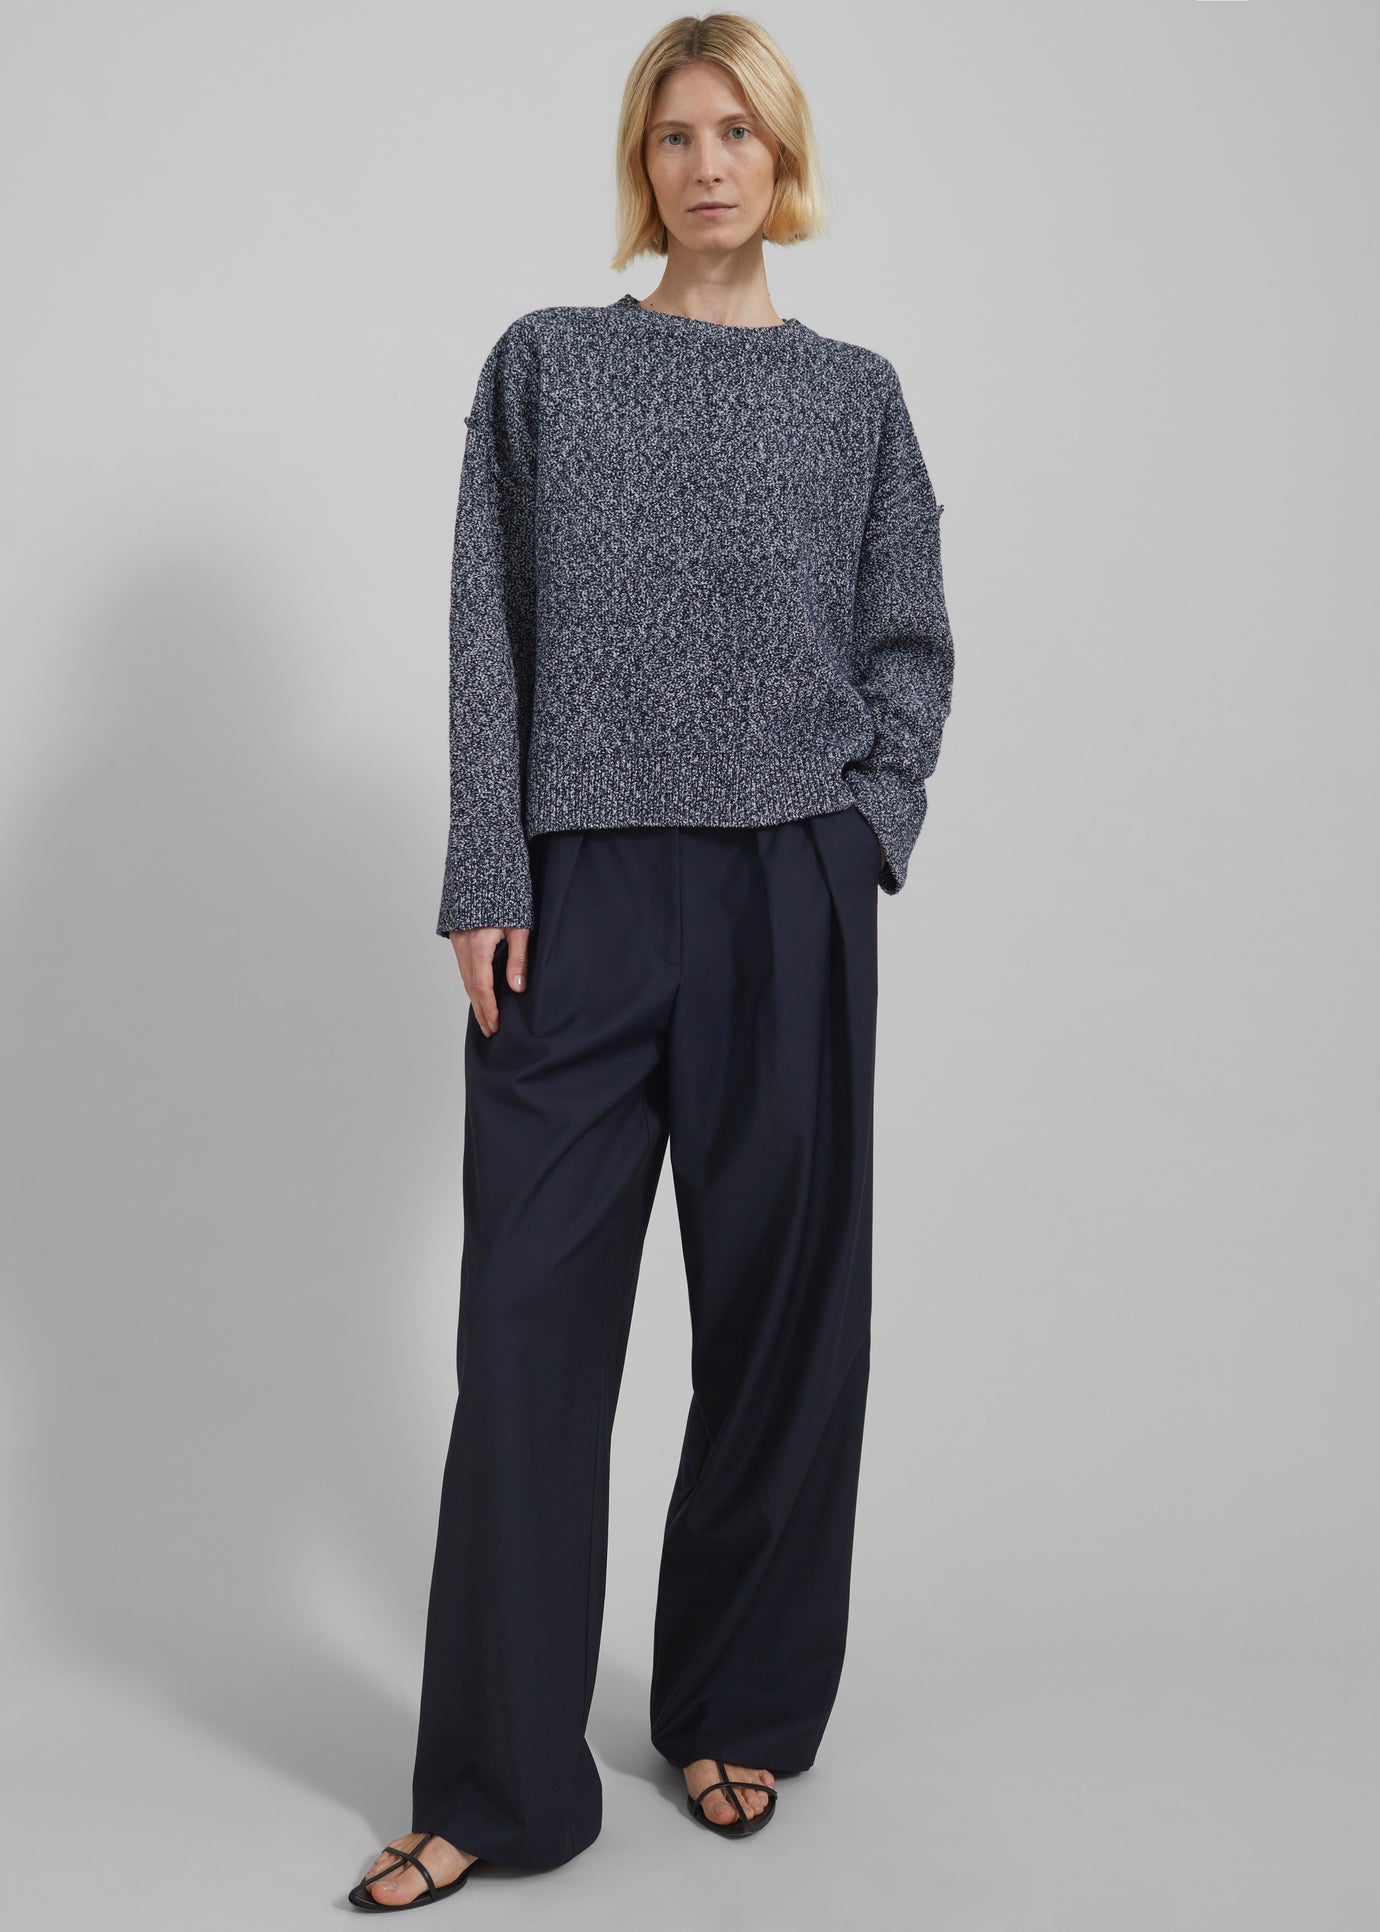 Proenza Schouler White Label Remy Sweater In Marled Knits - Dark Blue/Off White